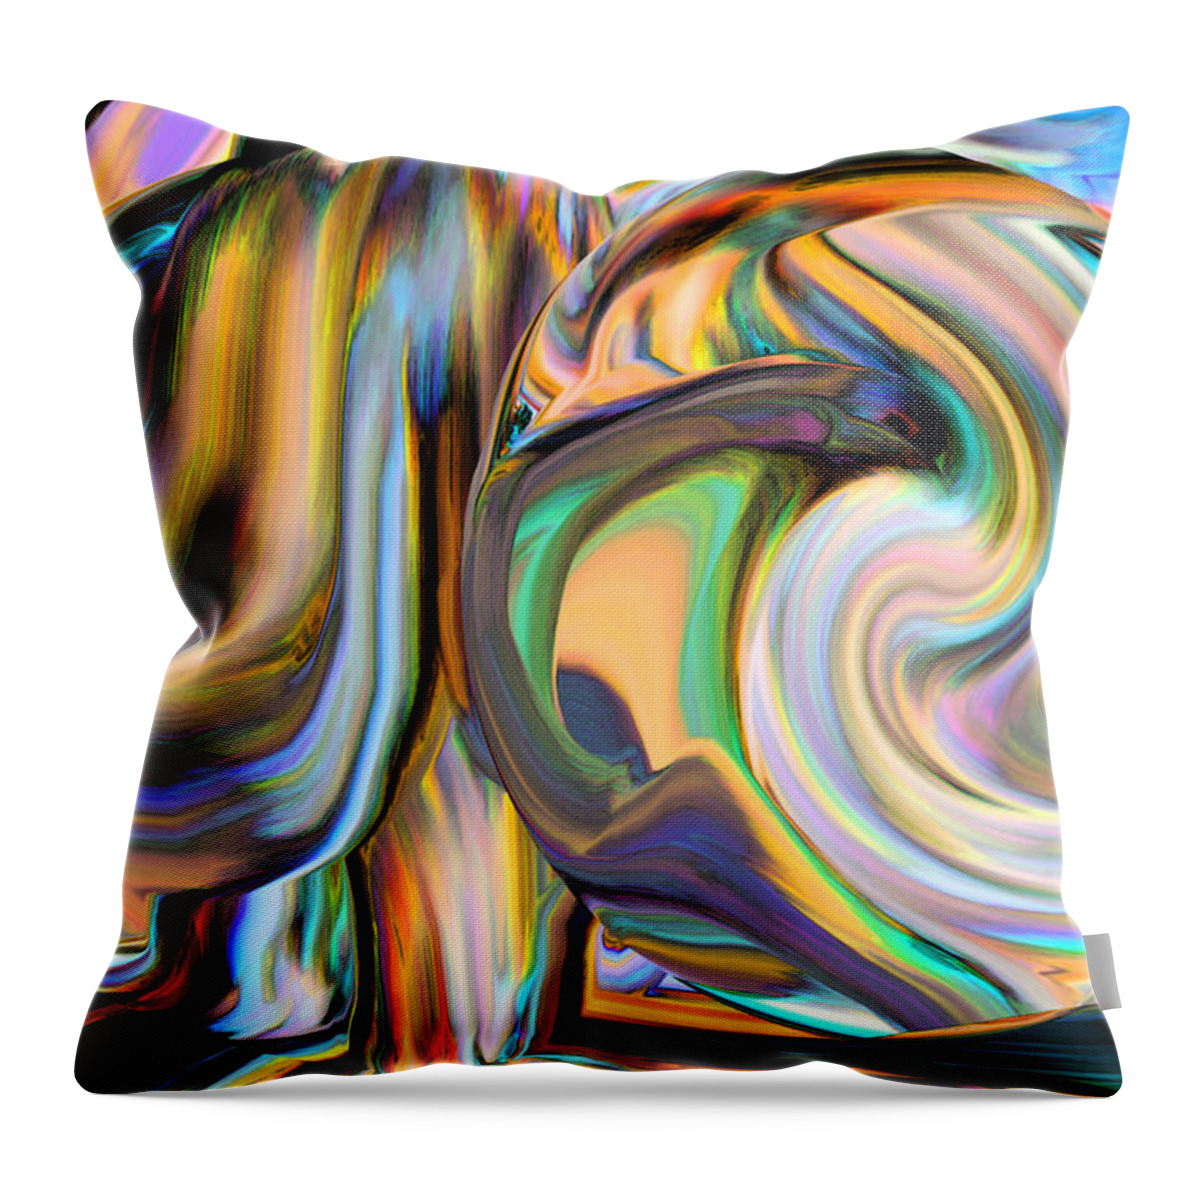 Original Modern Art Abstract Contemporary Vivid Colors Throw Pillow featuring the digital art Lean on Me by Phillip Mossbarger